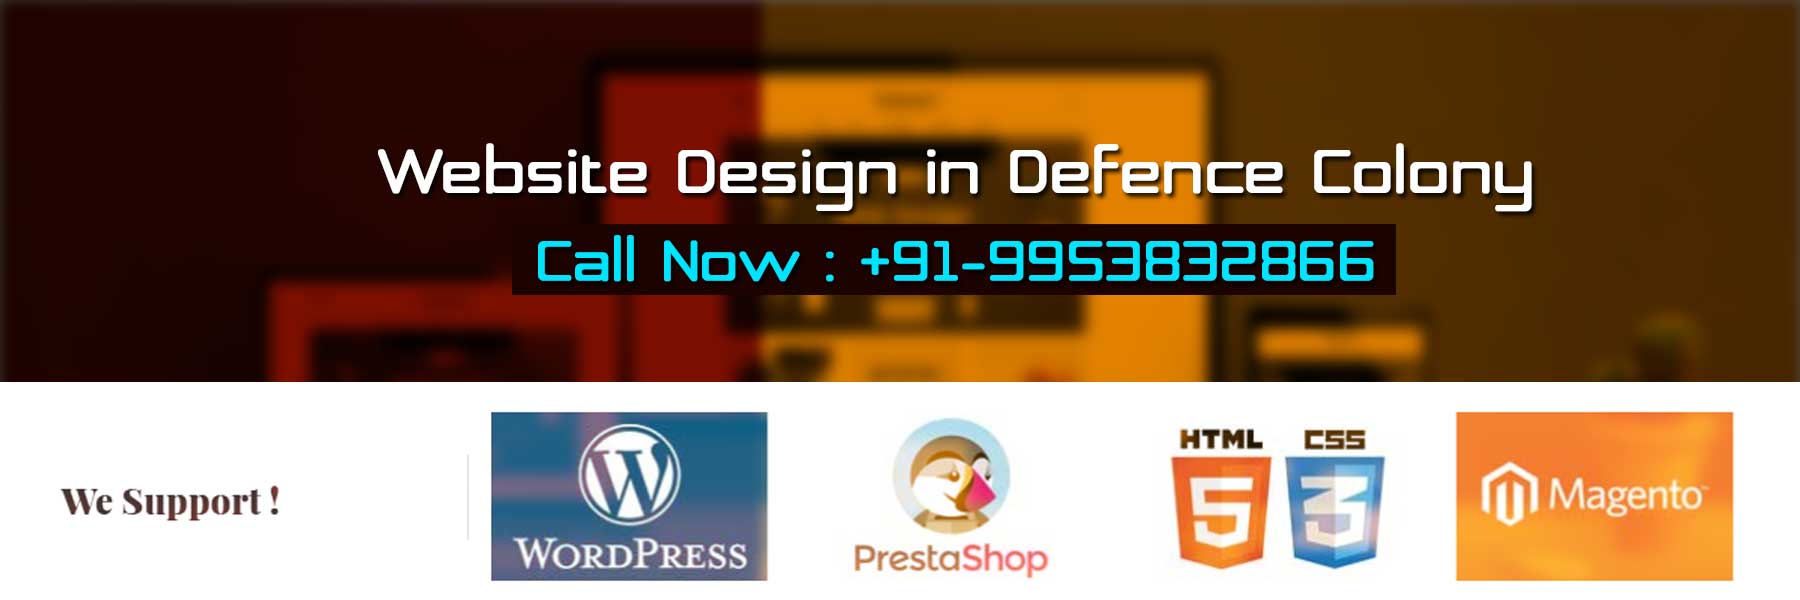 Website Design in Defence Colony